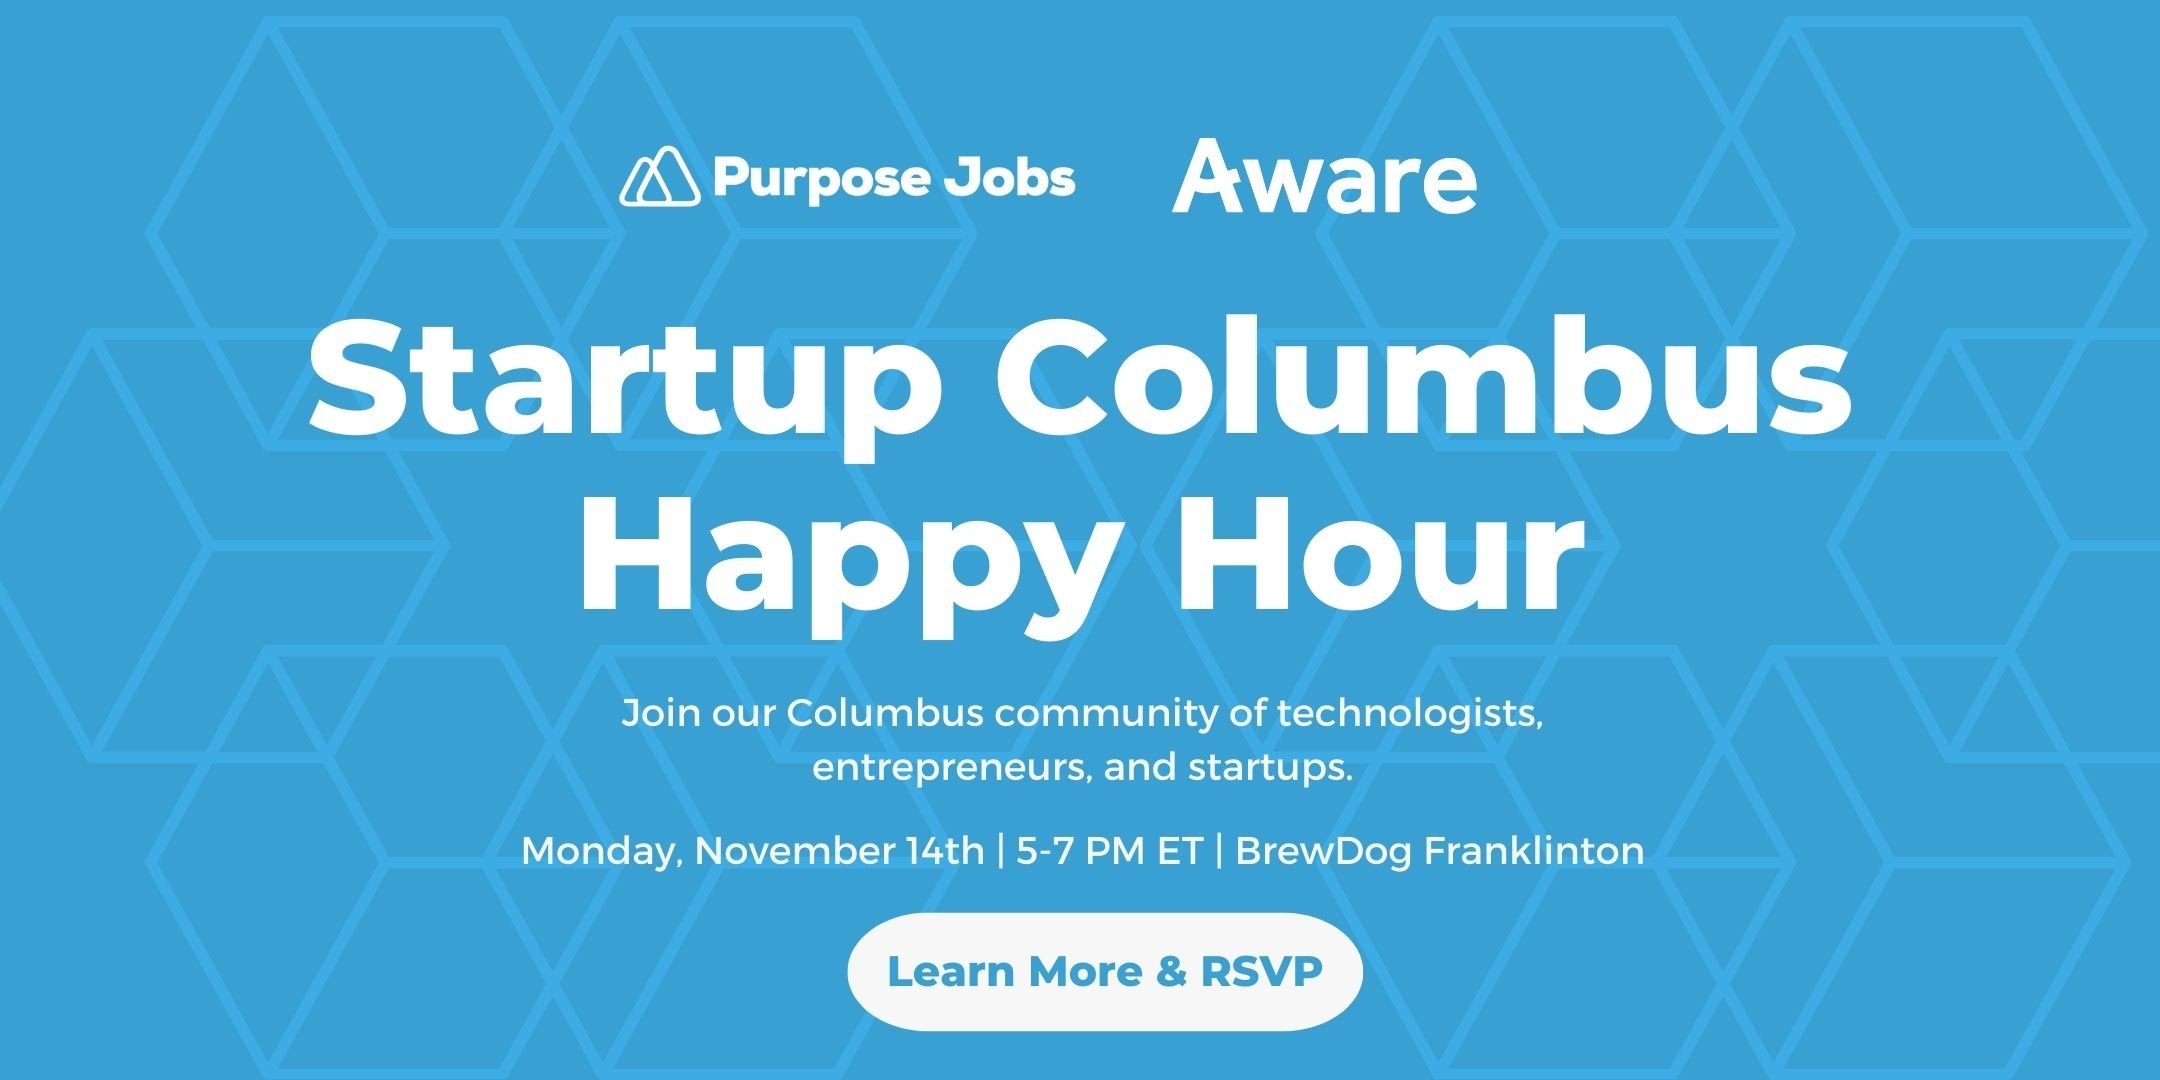 _Startup Columbus Happy Hour - Event Landing Page